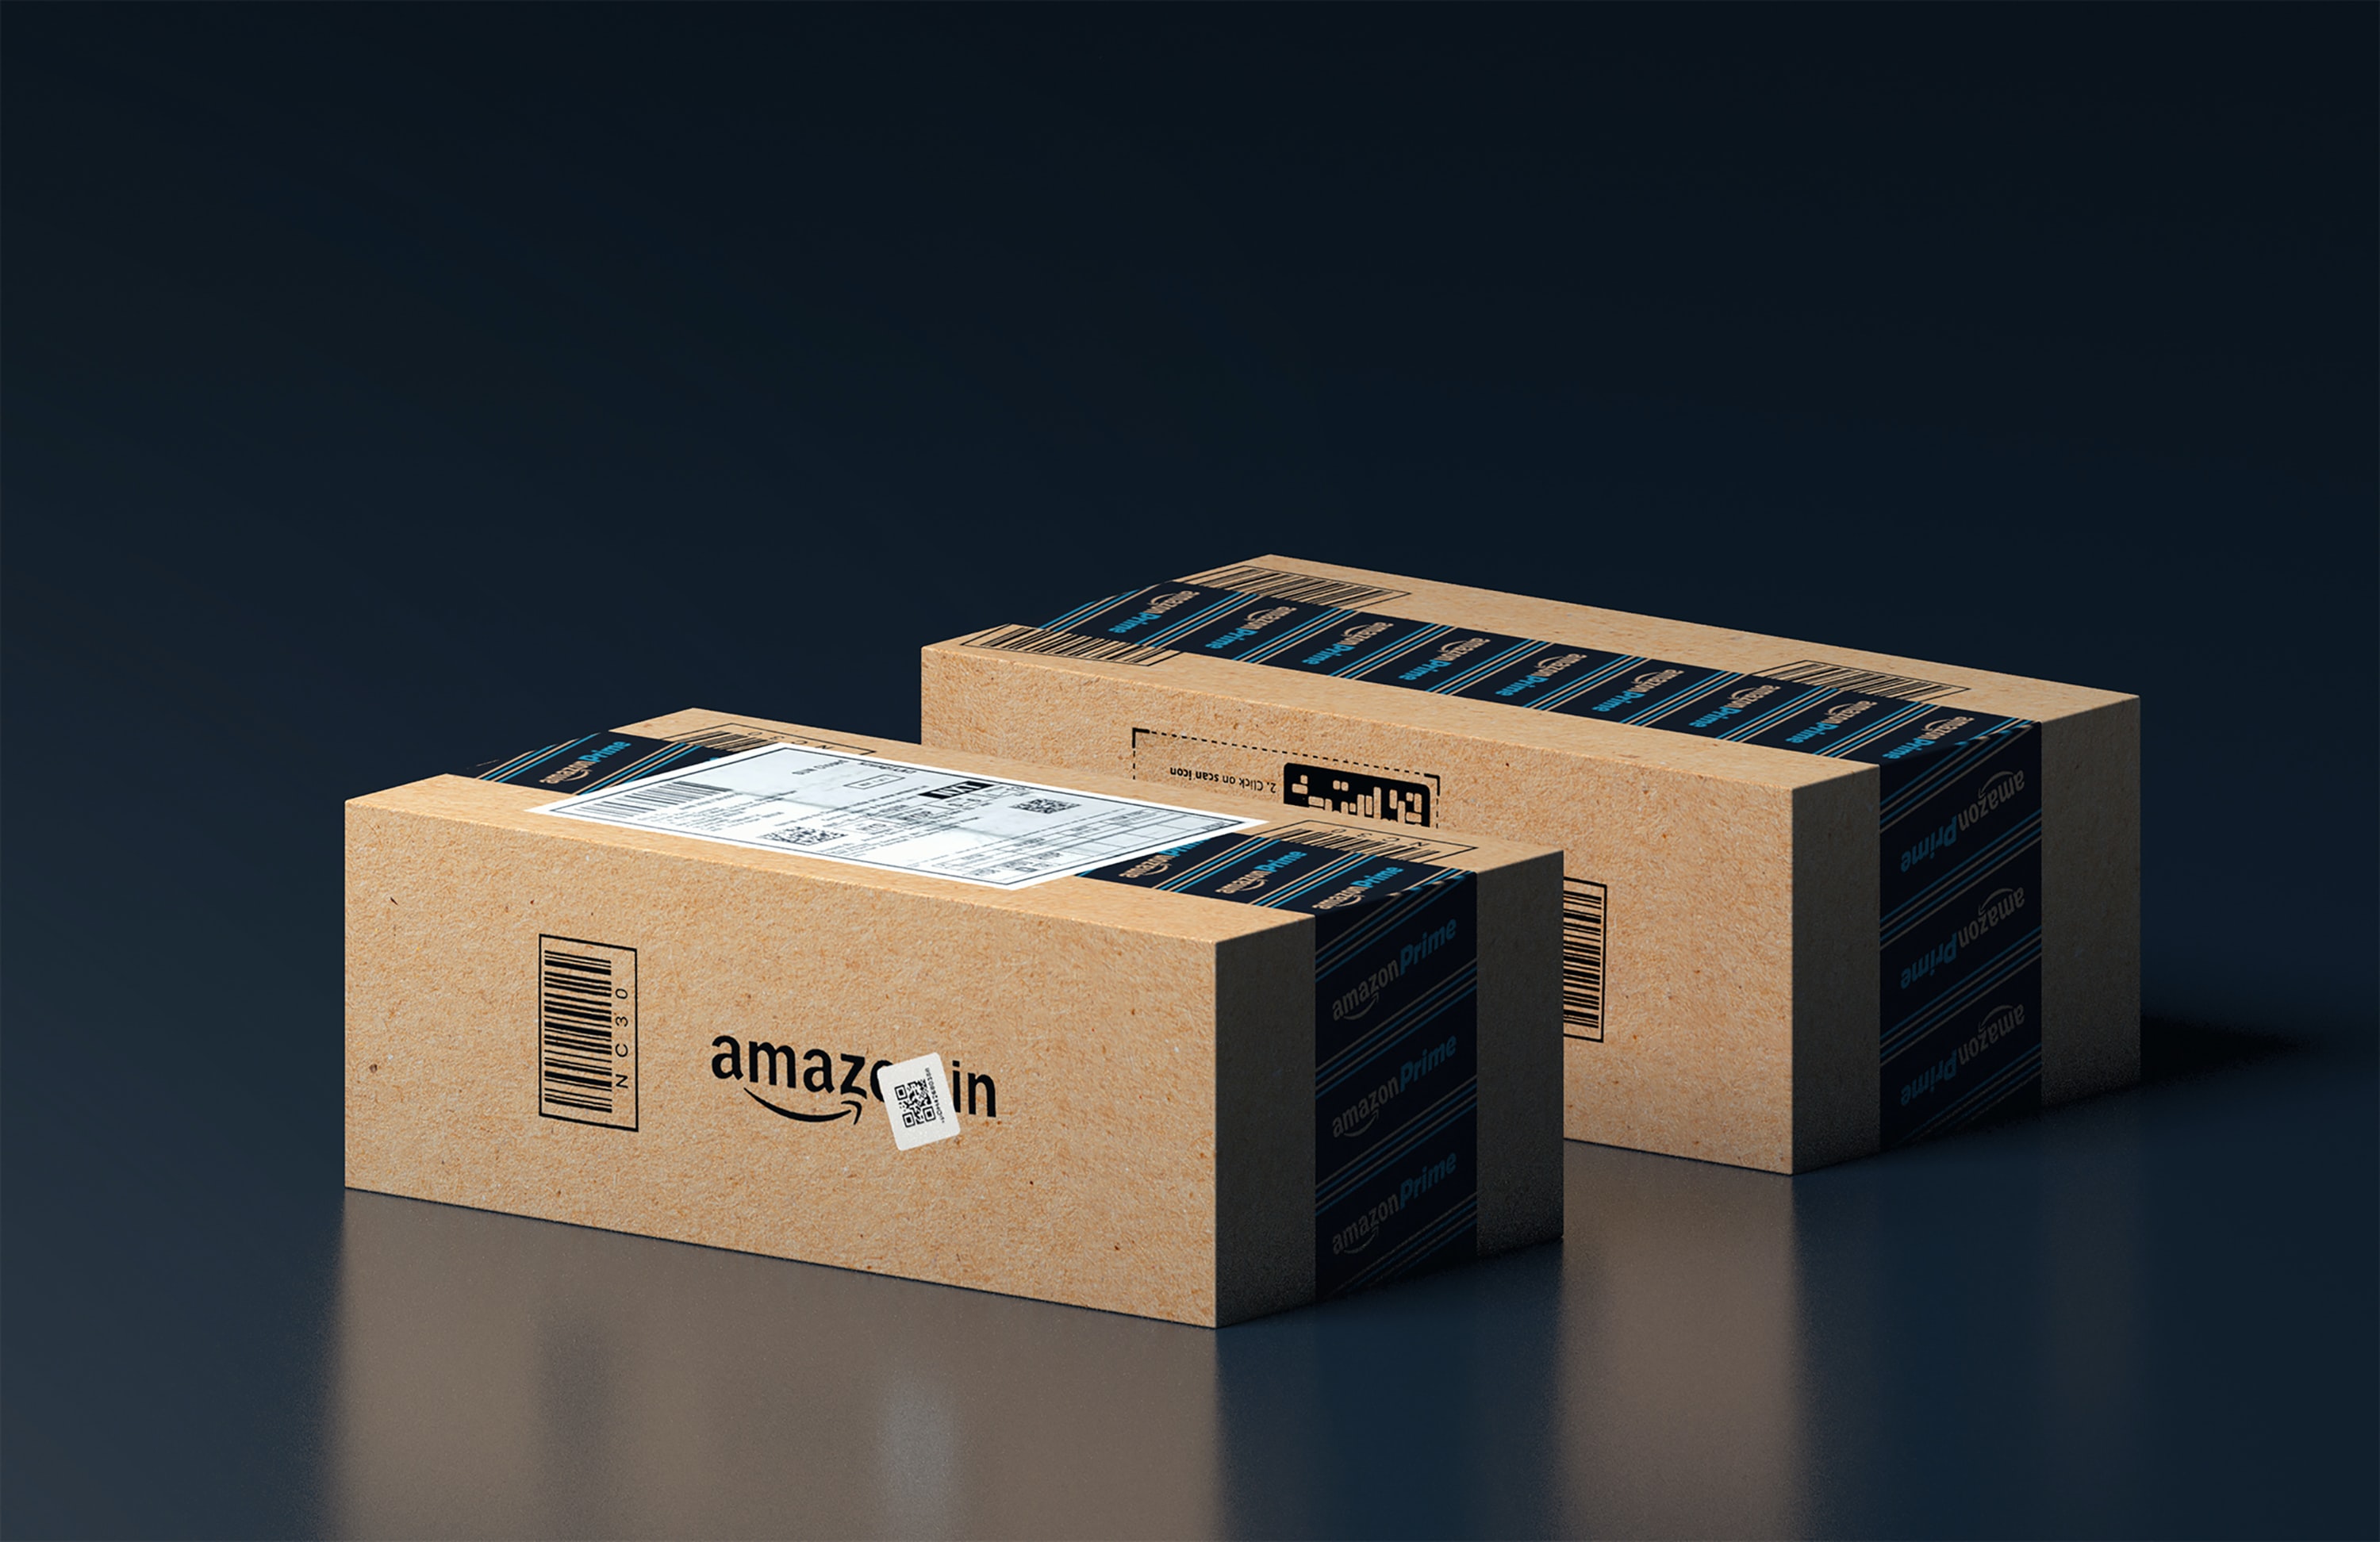 SkuNexus order management software is seamlessly integrated with fulfillment by Amazon. 